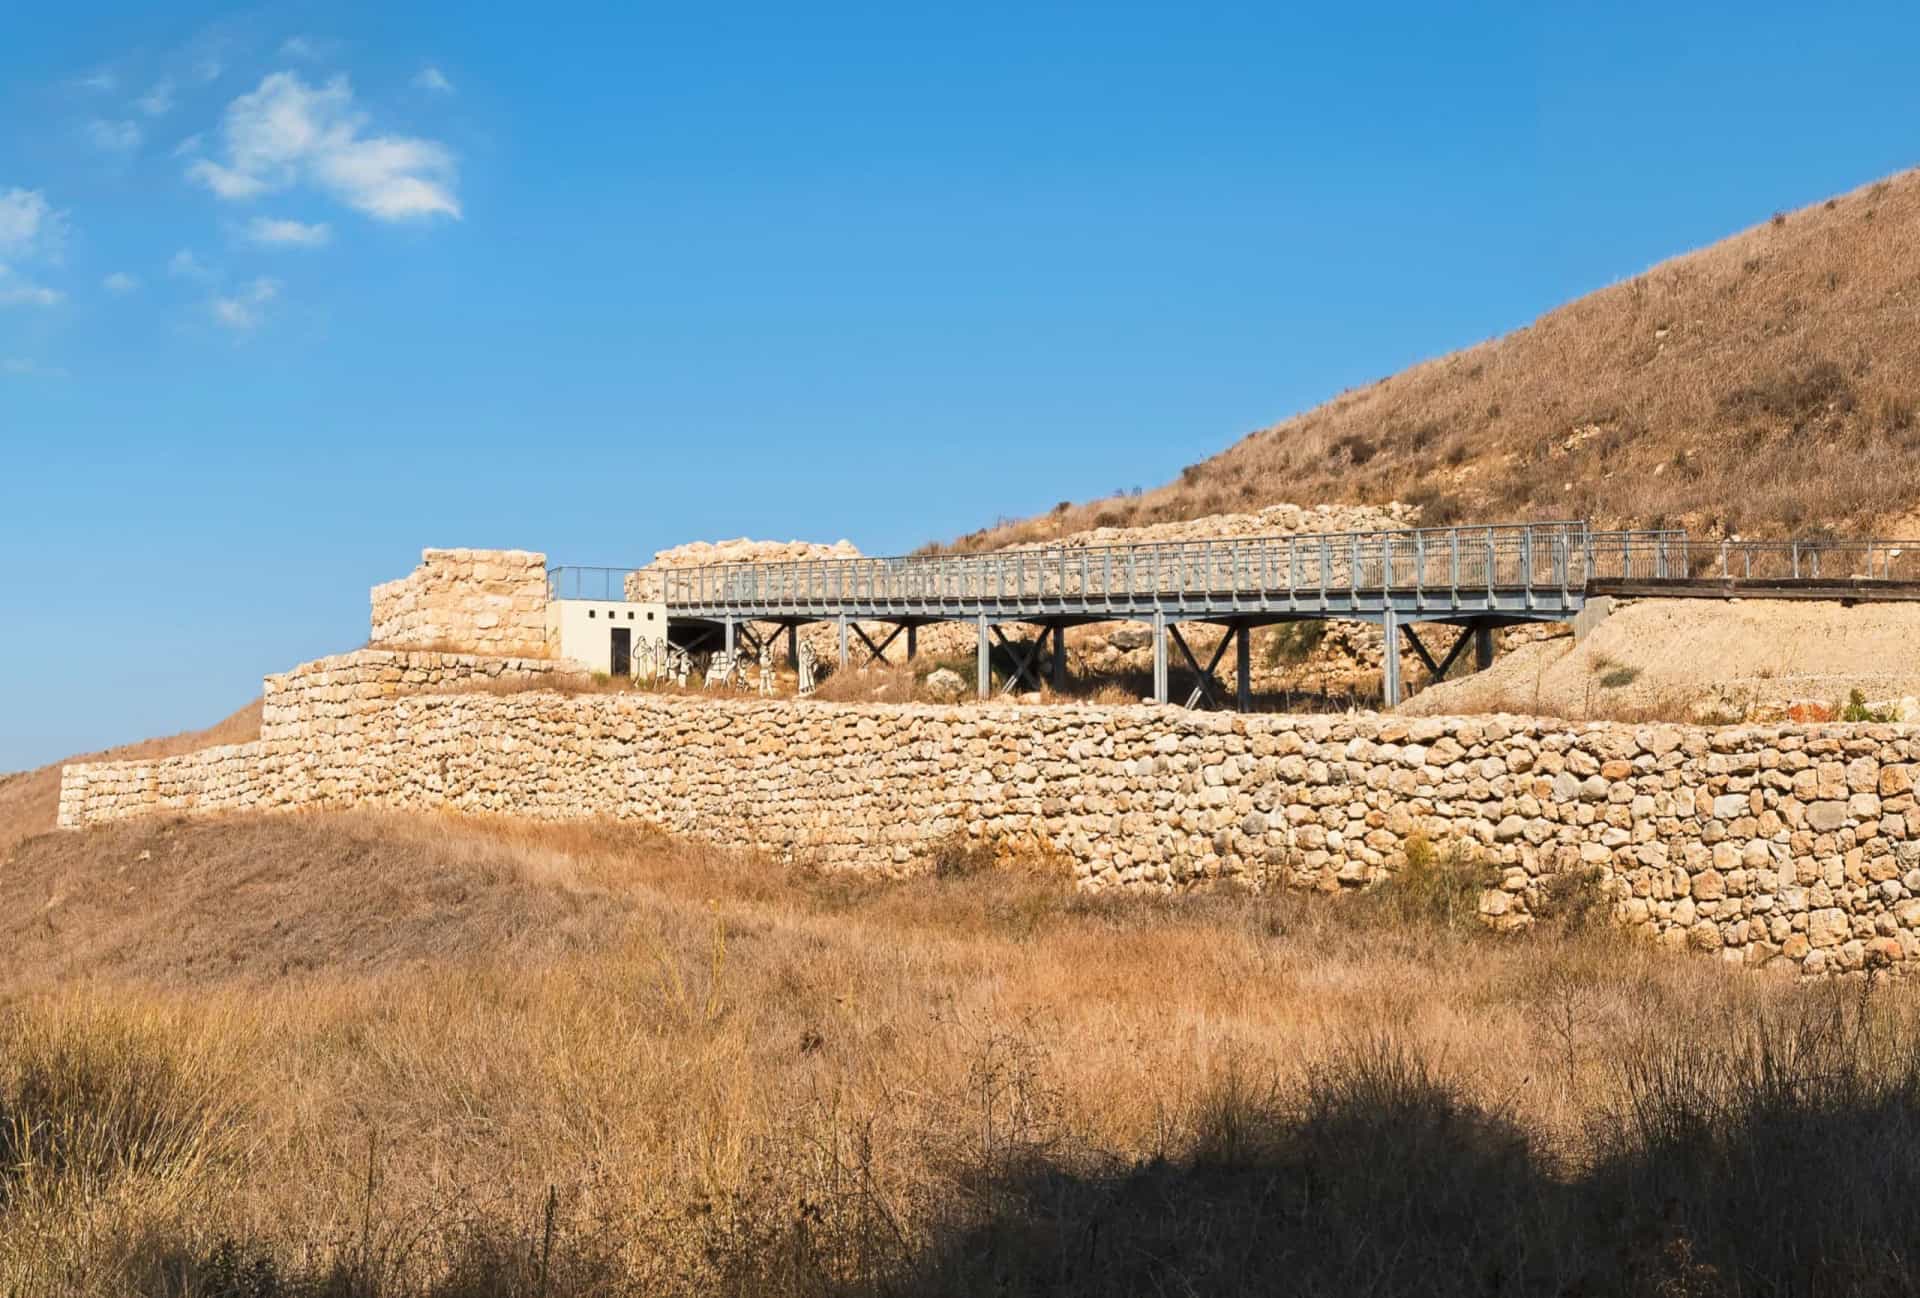 <p>The once mighty city of Lachish was said to be second only to Jerusalem in terms of power and prestige. The scene of numerous battles, most famously for its siege and conquest by the Neo-Assyrians in 701 BCE, Lachish lies near present-day Lakhish. Pictured are the ruins of the main gate and northern stone wall of this ancient biblical city.</p>